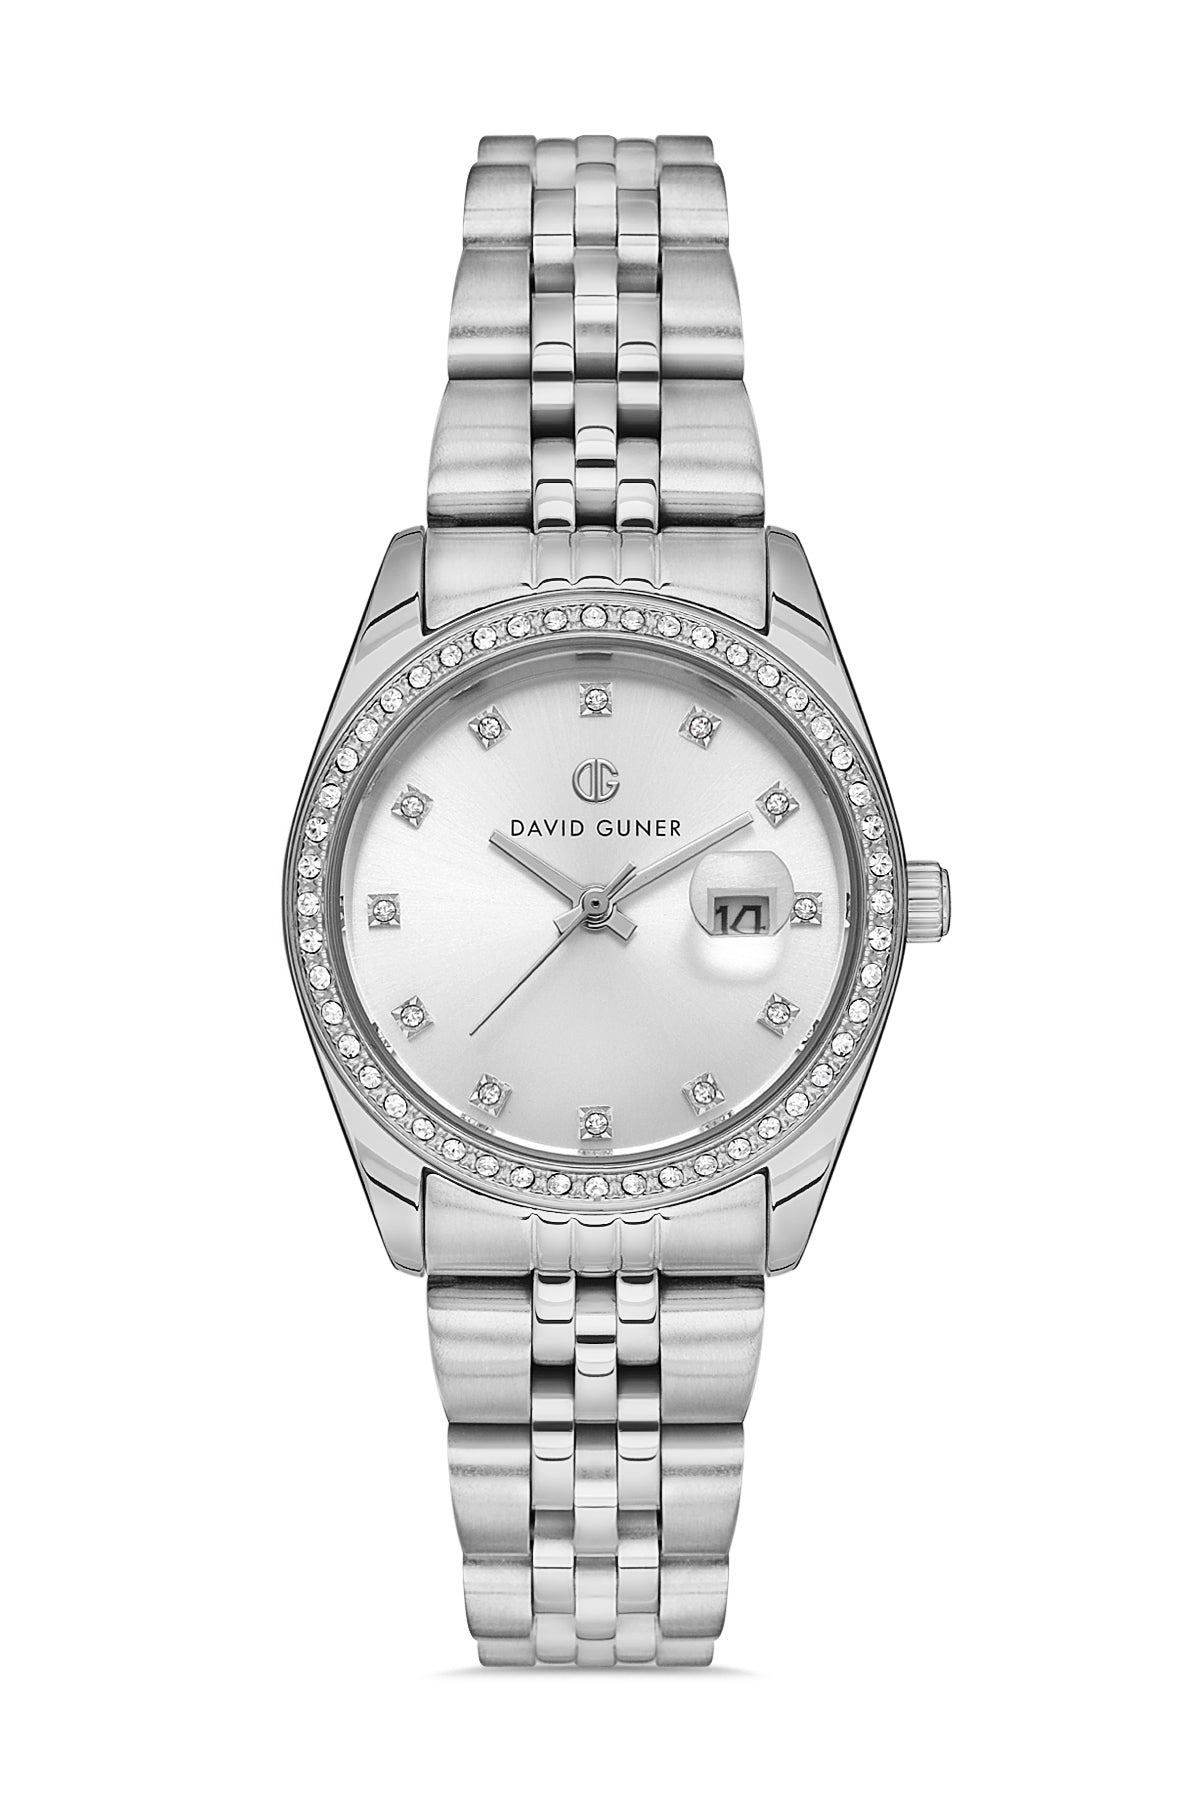 David Guner Women's Wristwatch with Silver Dial and Silver Plated Calendar